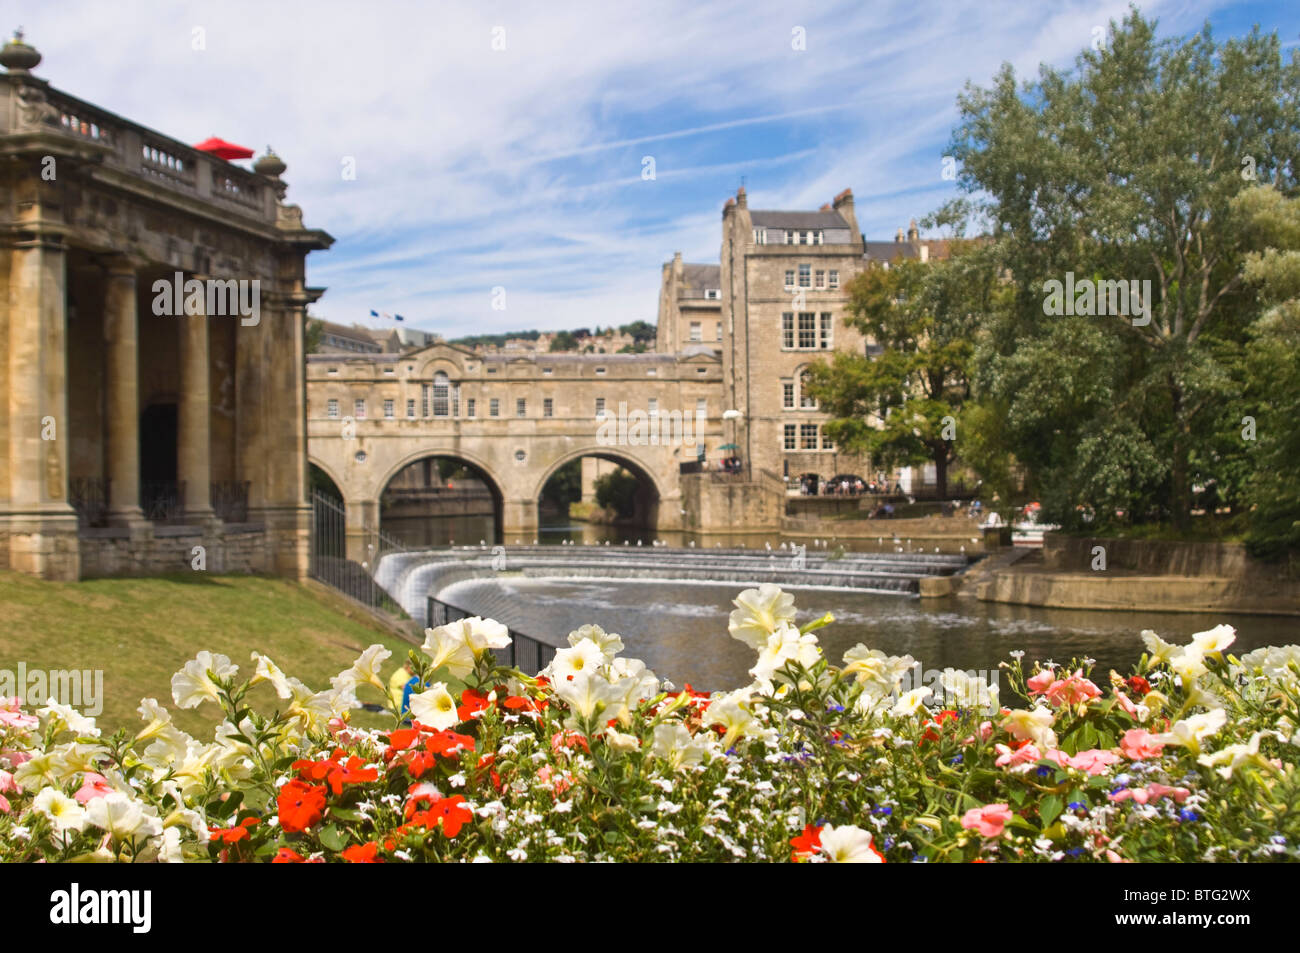 Horizontal wide angle of the grade 1 listed Pulteney Bridge crossing the river Avon in the centre of Bath on a sunny day. Stock Photo